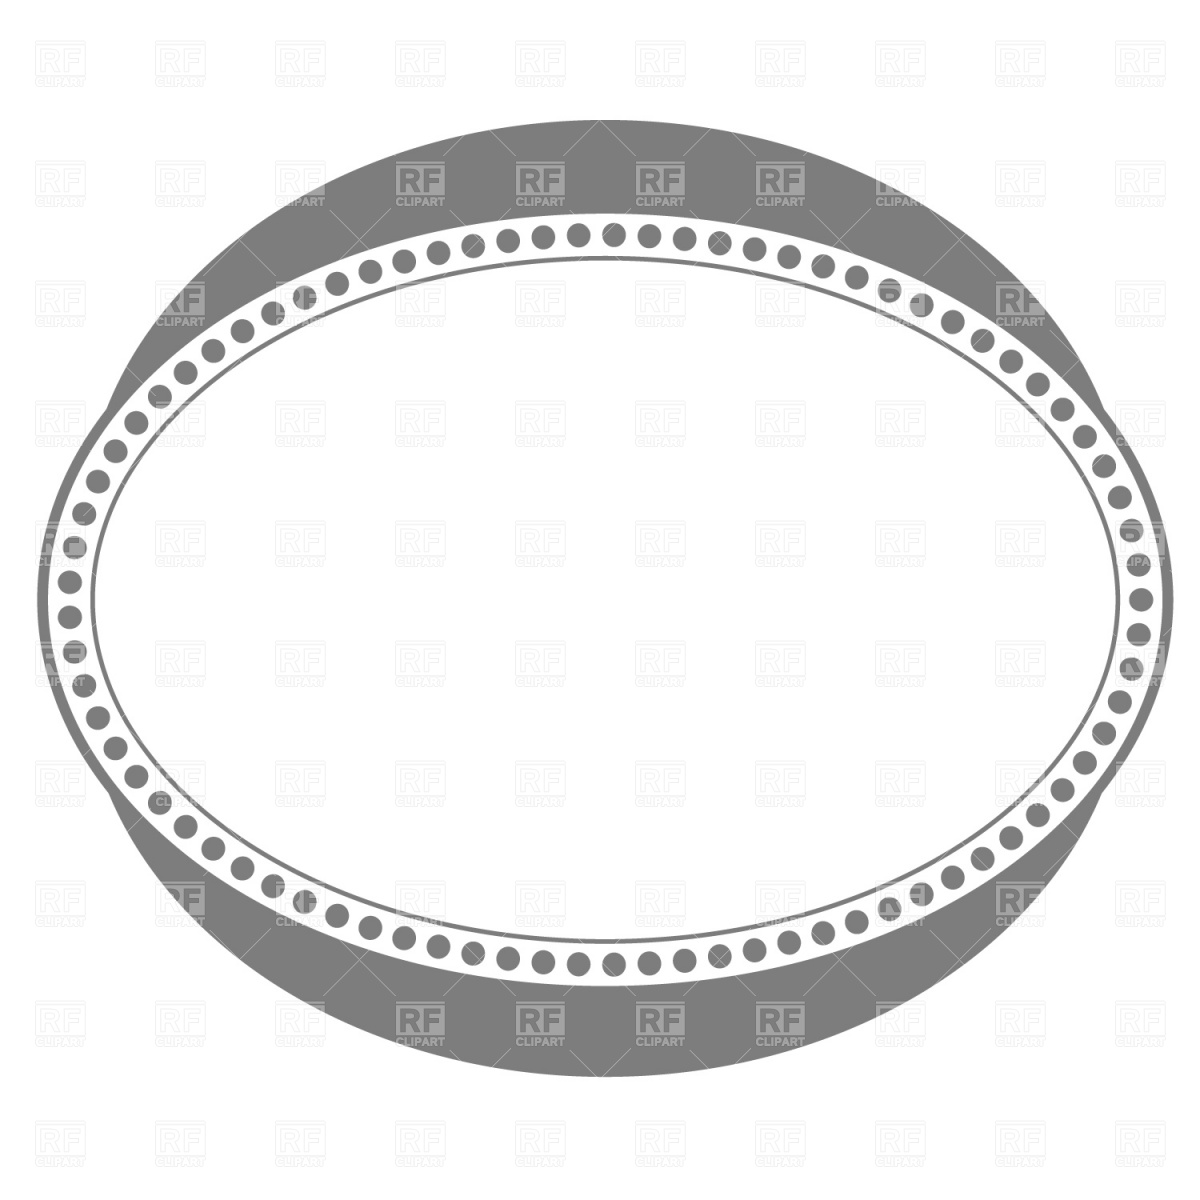 Borders And Frames   Oval Frame Download Royalty Free Vector Clipart